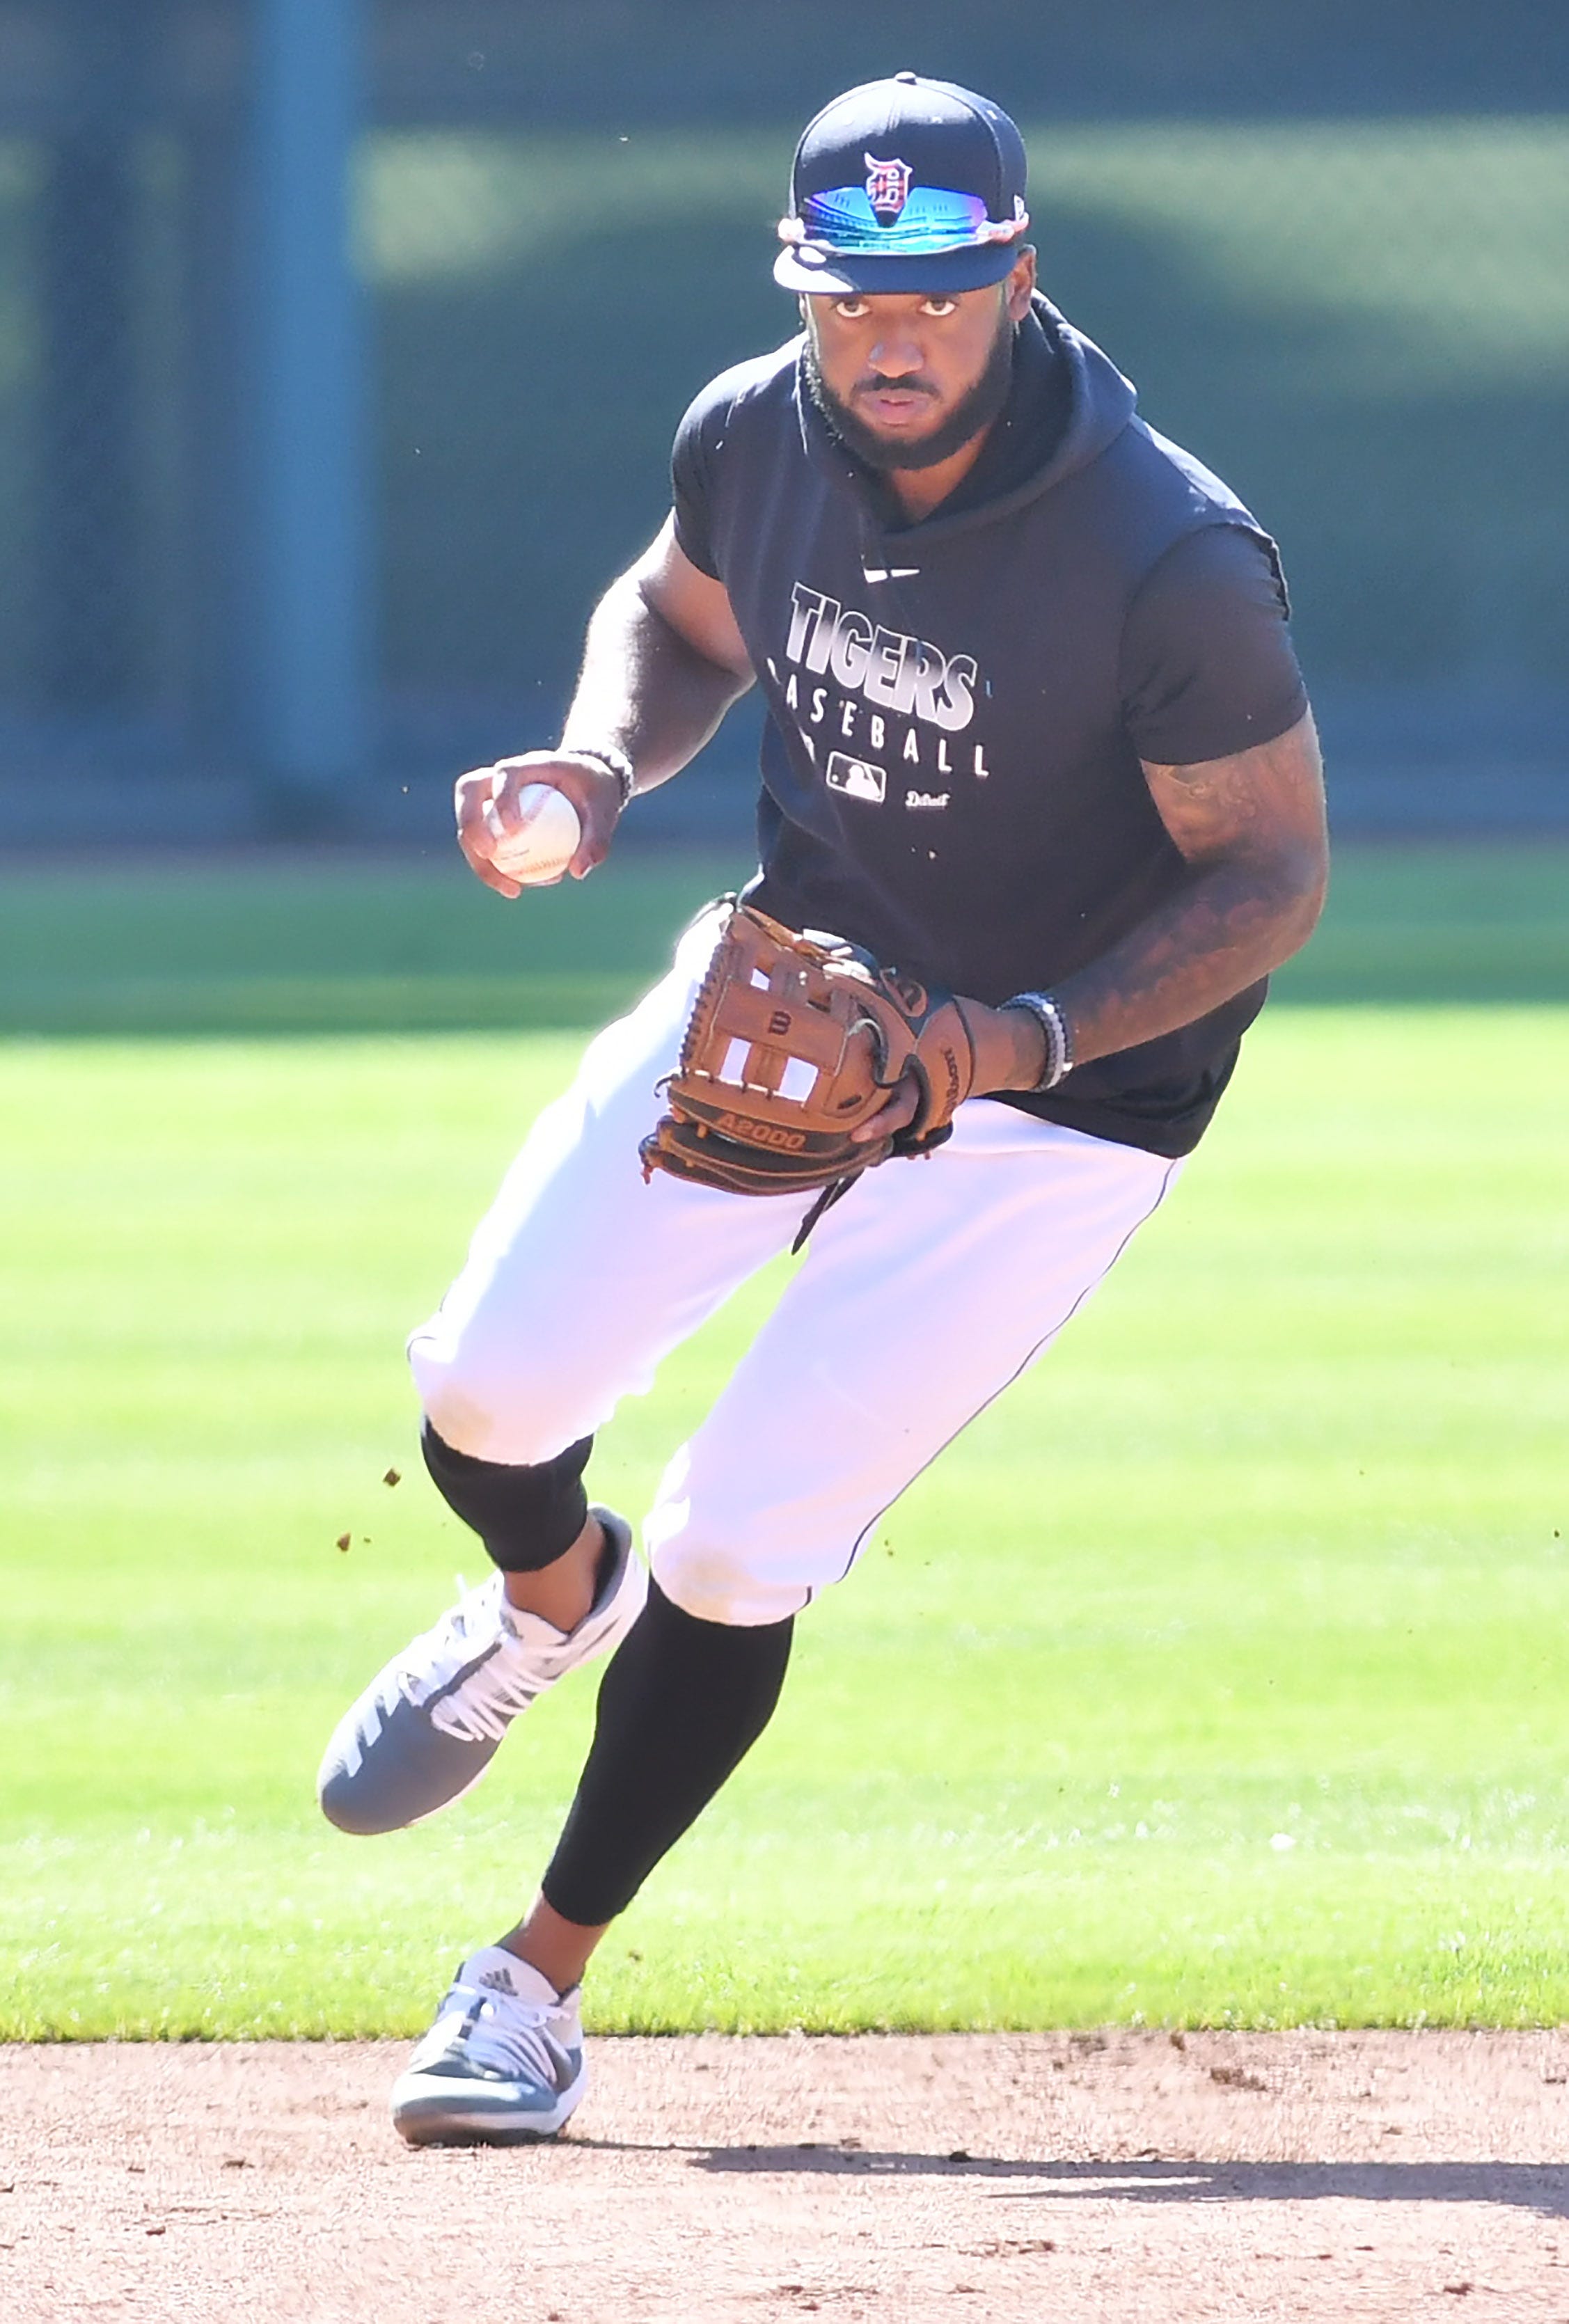 Tigers' Niko Goodrum fields a ground ball at Detroit Tigers Summer Camp at Comerica Park in Detroit on July 14, 2020.